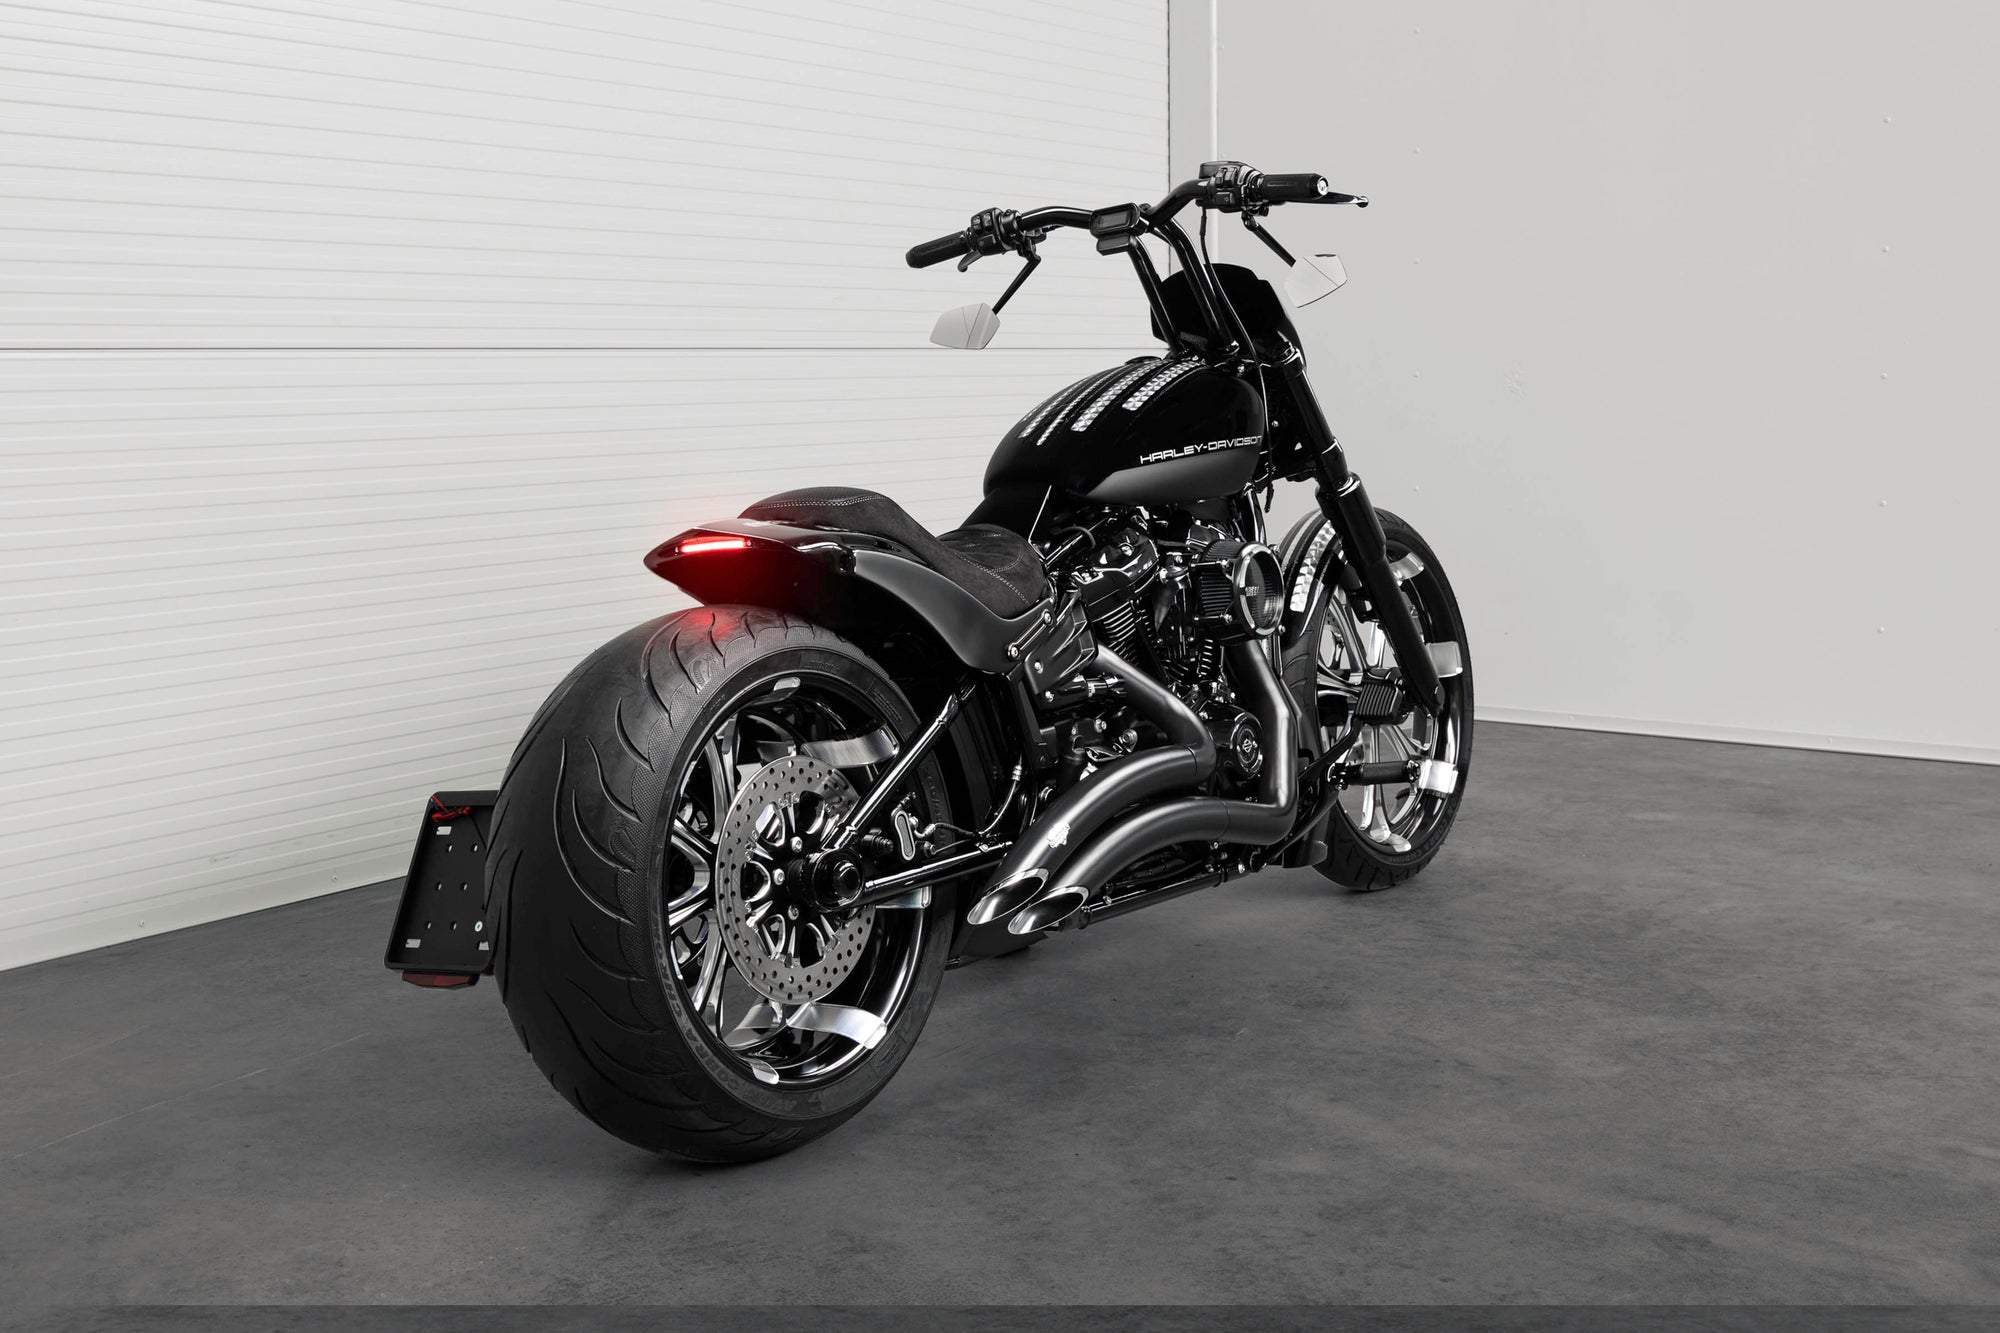 Harley Davidson motorcycle with Killer Custom parts from the rear in a white modern bike shop